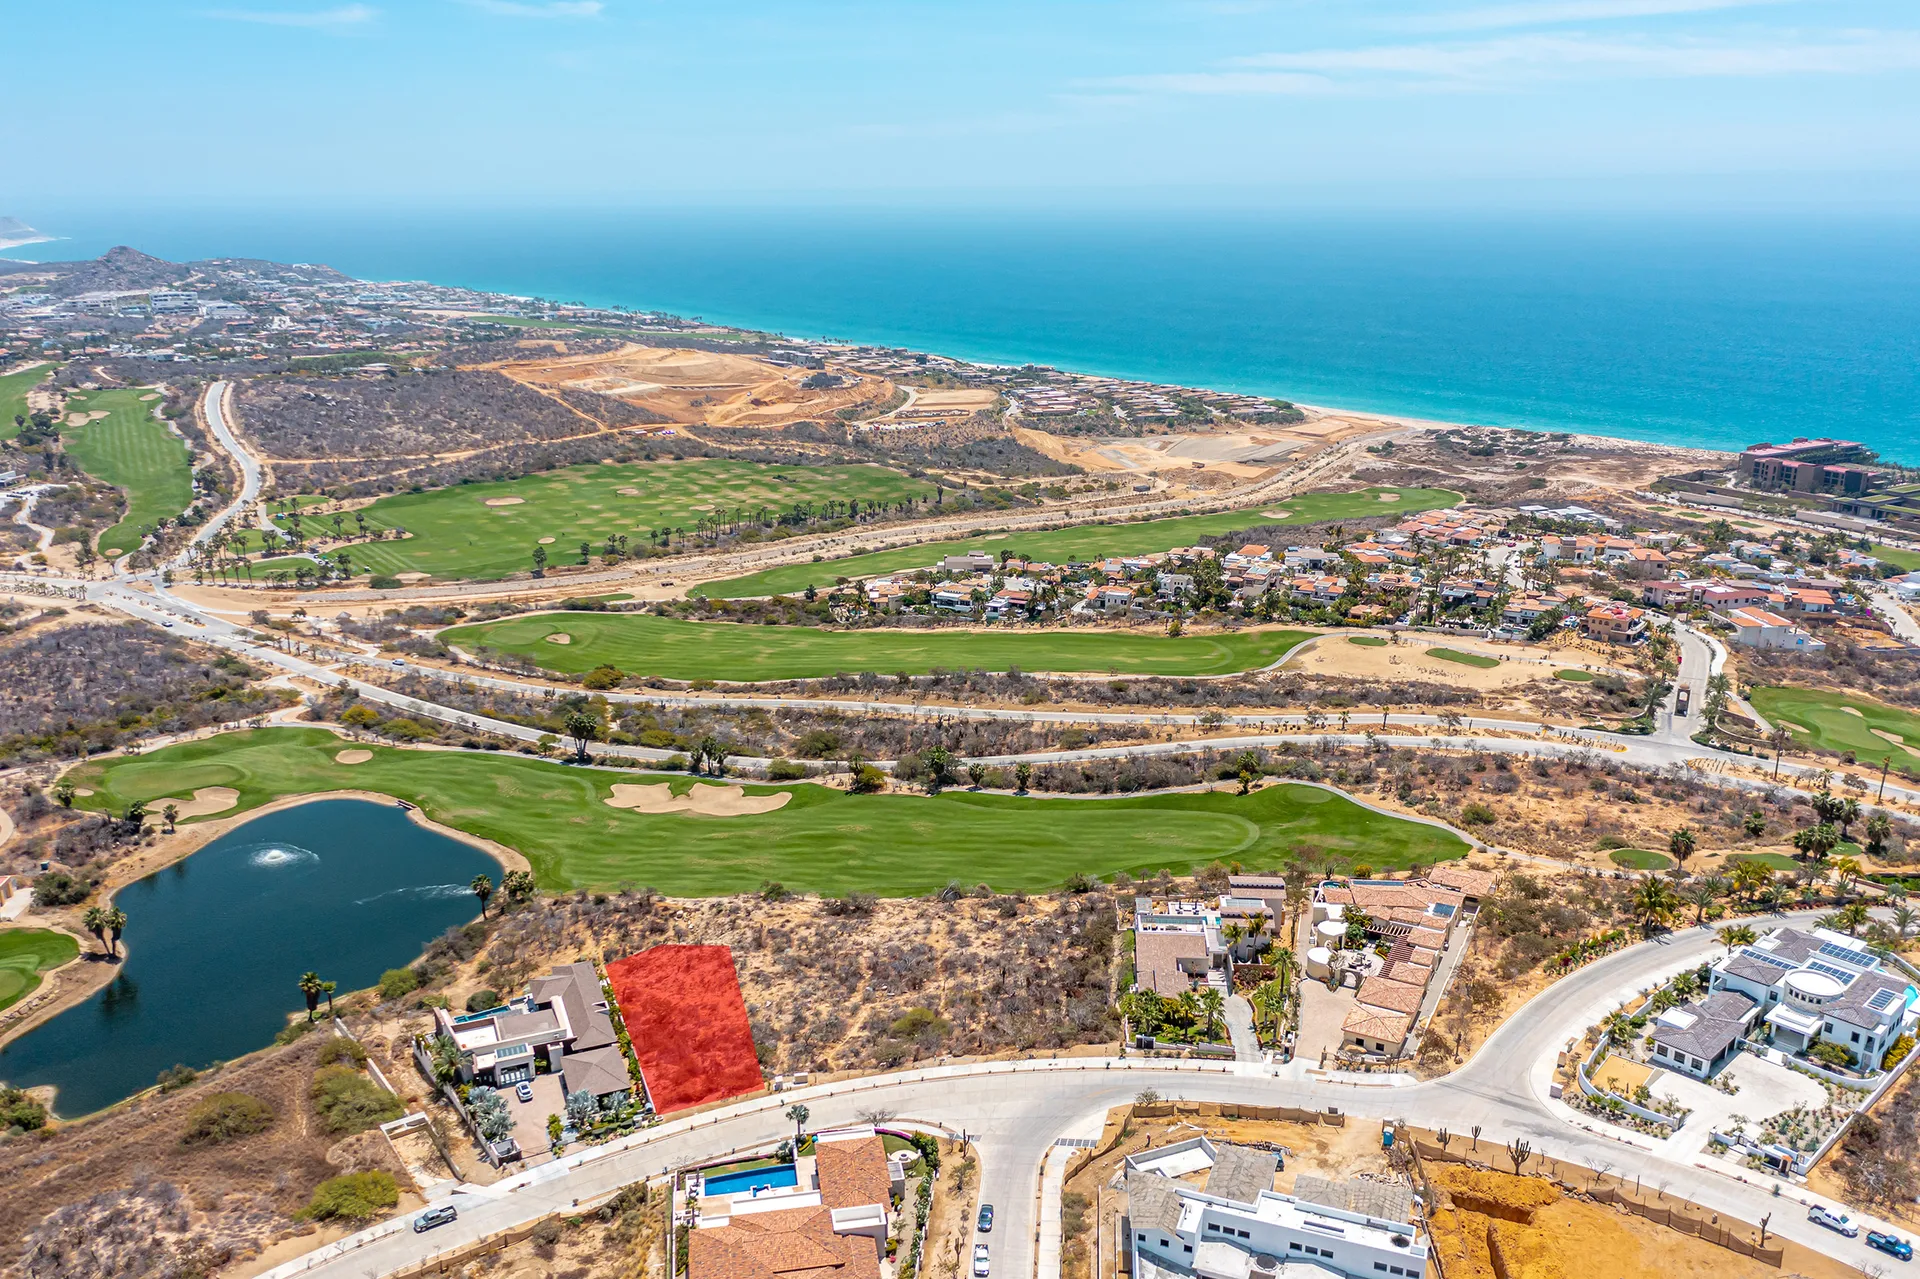 Homesite 57 overlooks the fairways and one of the lakes of the Puerto Los Cabos golf course, to the blue ocean.